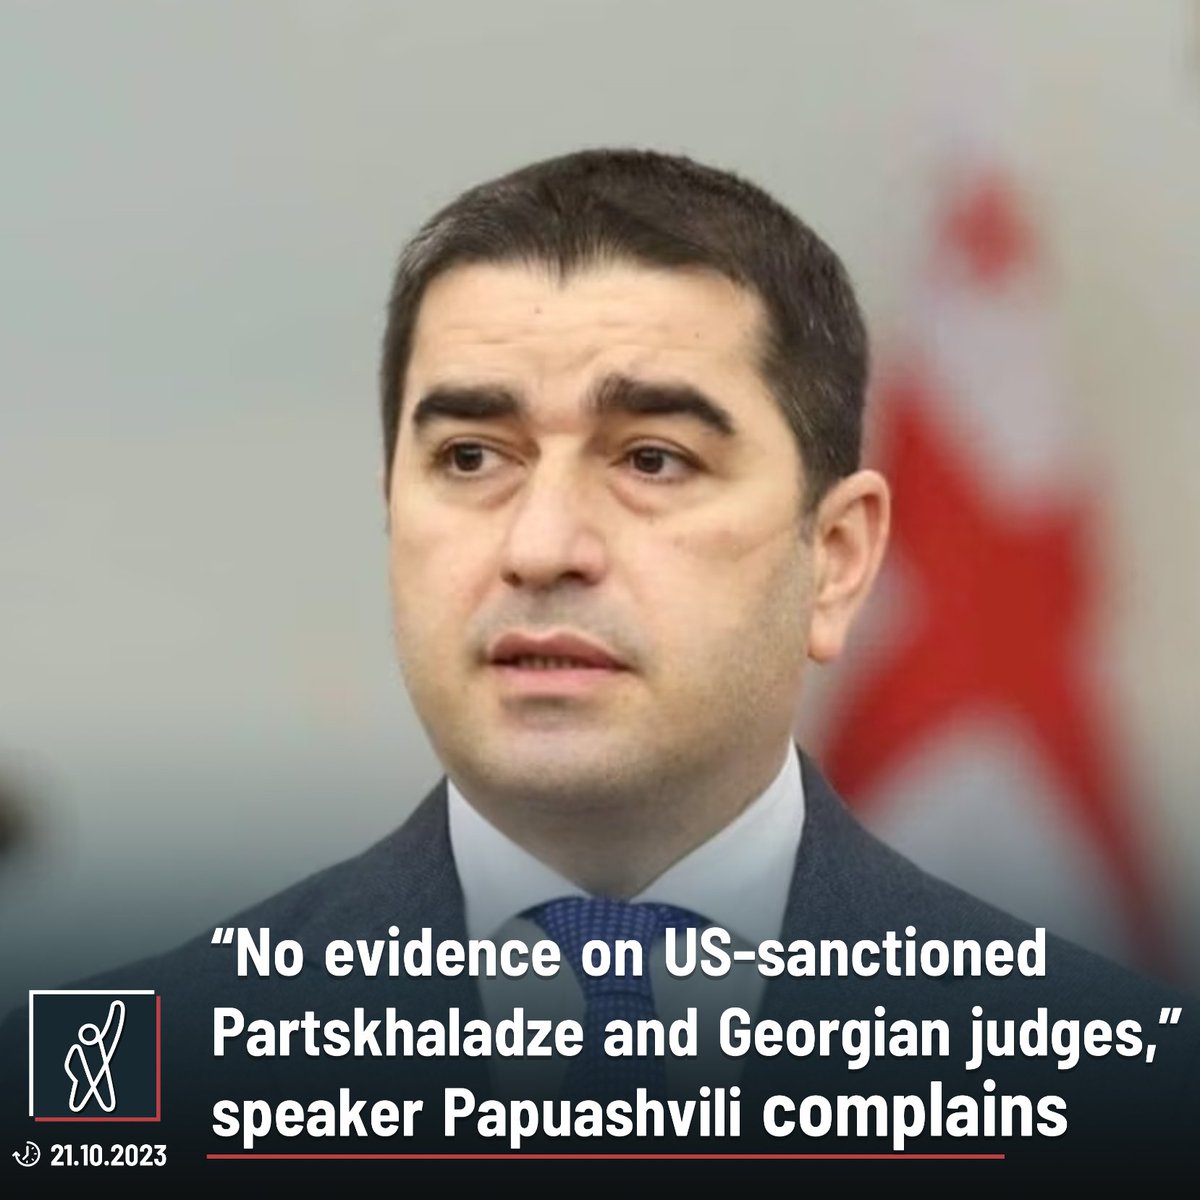 “My personal conclusion is that this case [against Otar Partskhaladze] seems to be closed or will be closed soon. We have seen that a month has passed since the accusation against Otar Partskhaladze was publicly announced, behind which it seems that there is no evidence. Second,…